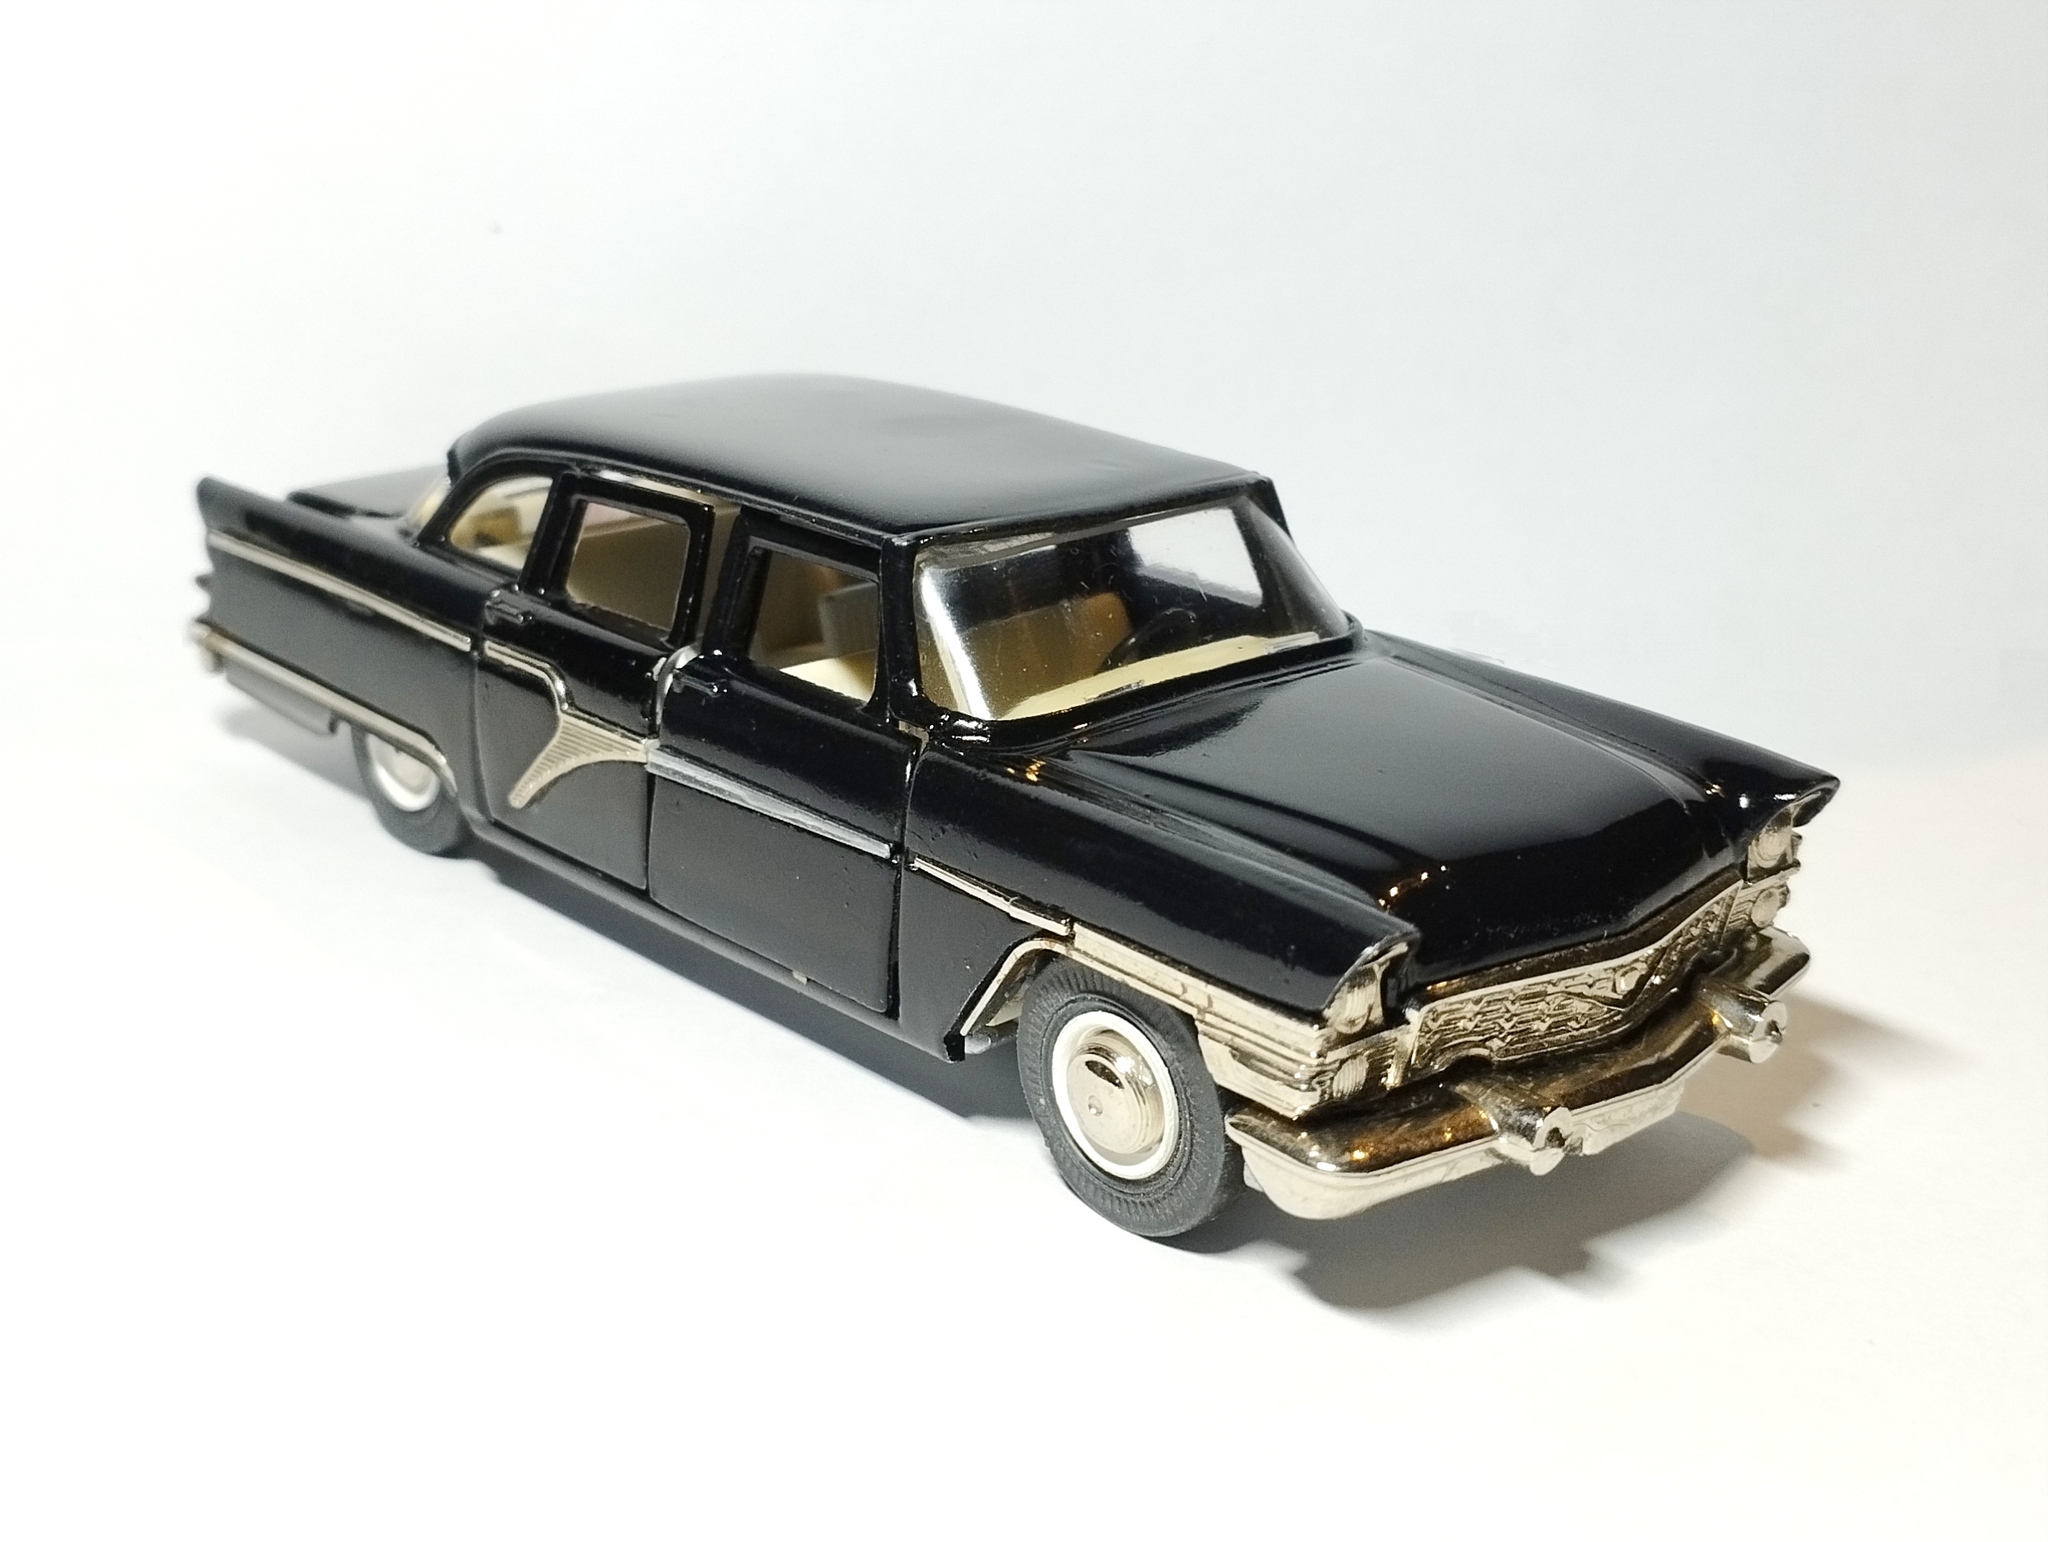 Restoration of the GAZ-13 Seagull model using 3D technologies - My, 1:43, Tantalum, Modeling, Made in USSR, Scale model, Collection, Hobby, Recovery, Restoration, Car, Gaz-13 Chaika, Gas, bitter, 3D, 3D modeling, 3D печать, 3D printer, Anycubic, Longpost